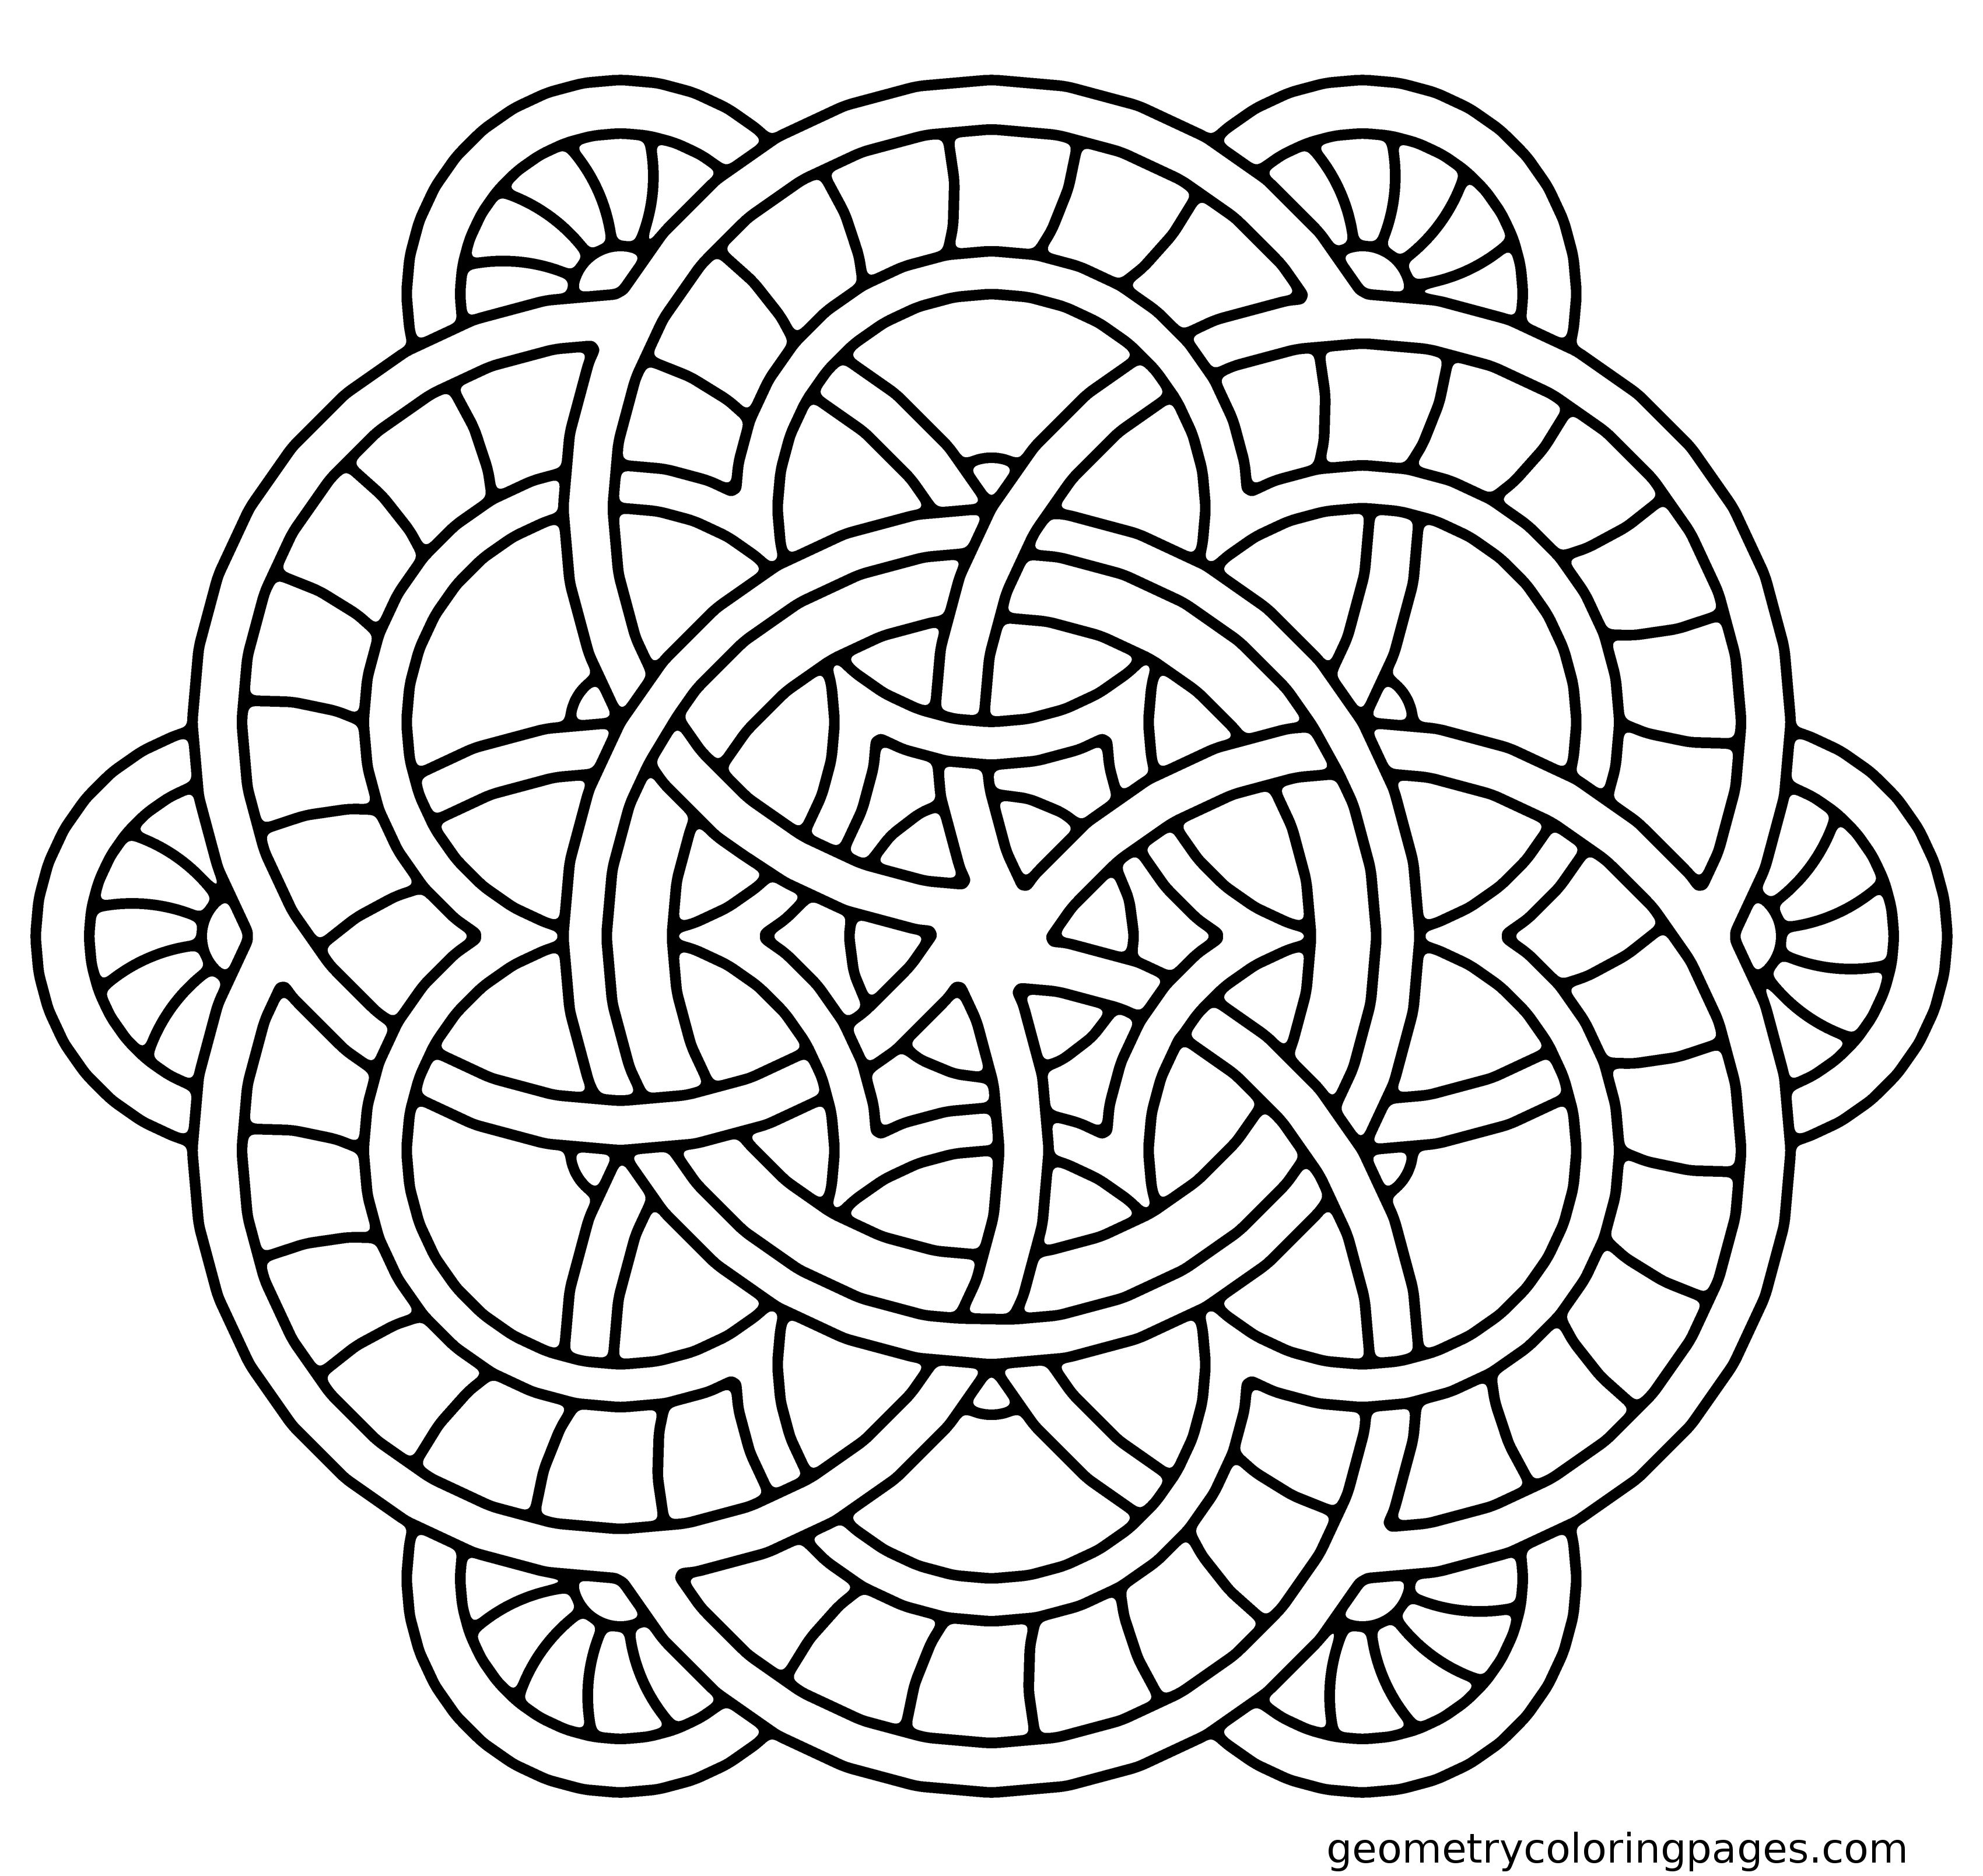 Free Printable Mandala Coloring Pages Adults Mandala Coloring Pages Printable Free Cozy For Kids Fresh With